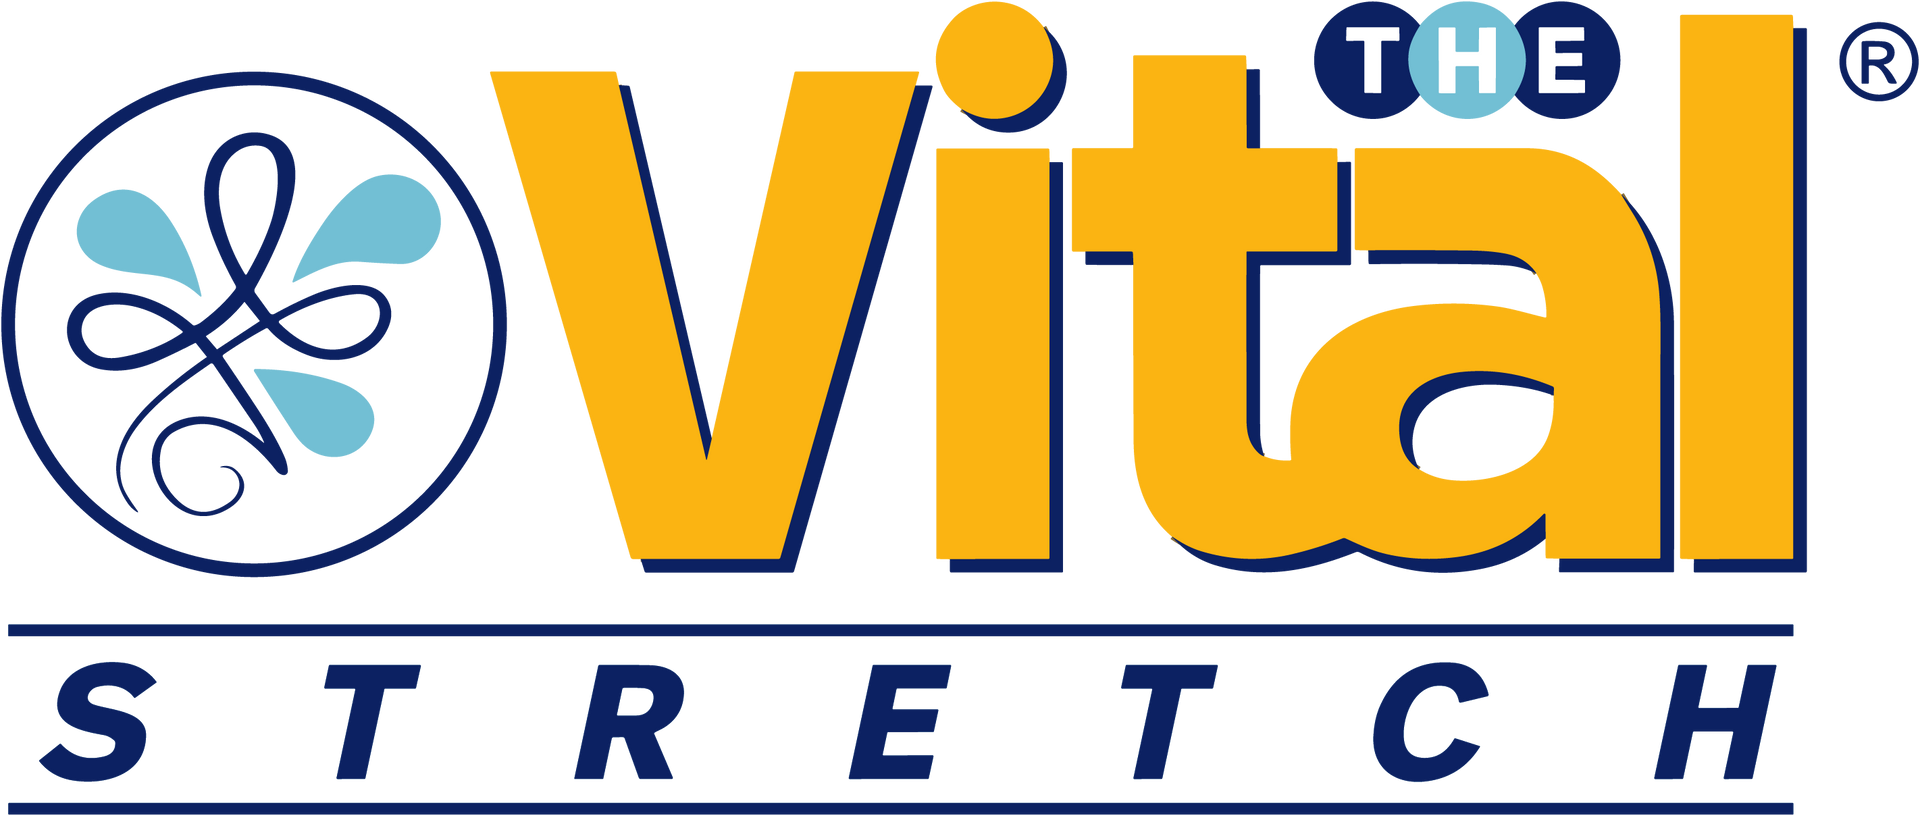 the vital stretch logo is yellow and blue on a white background